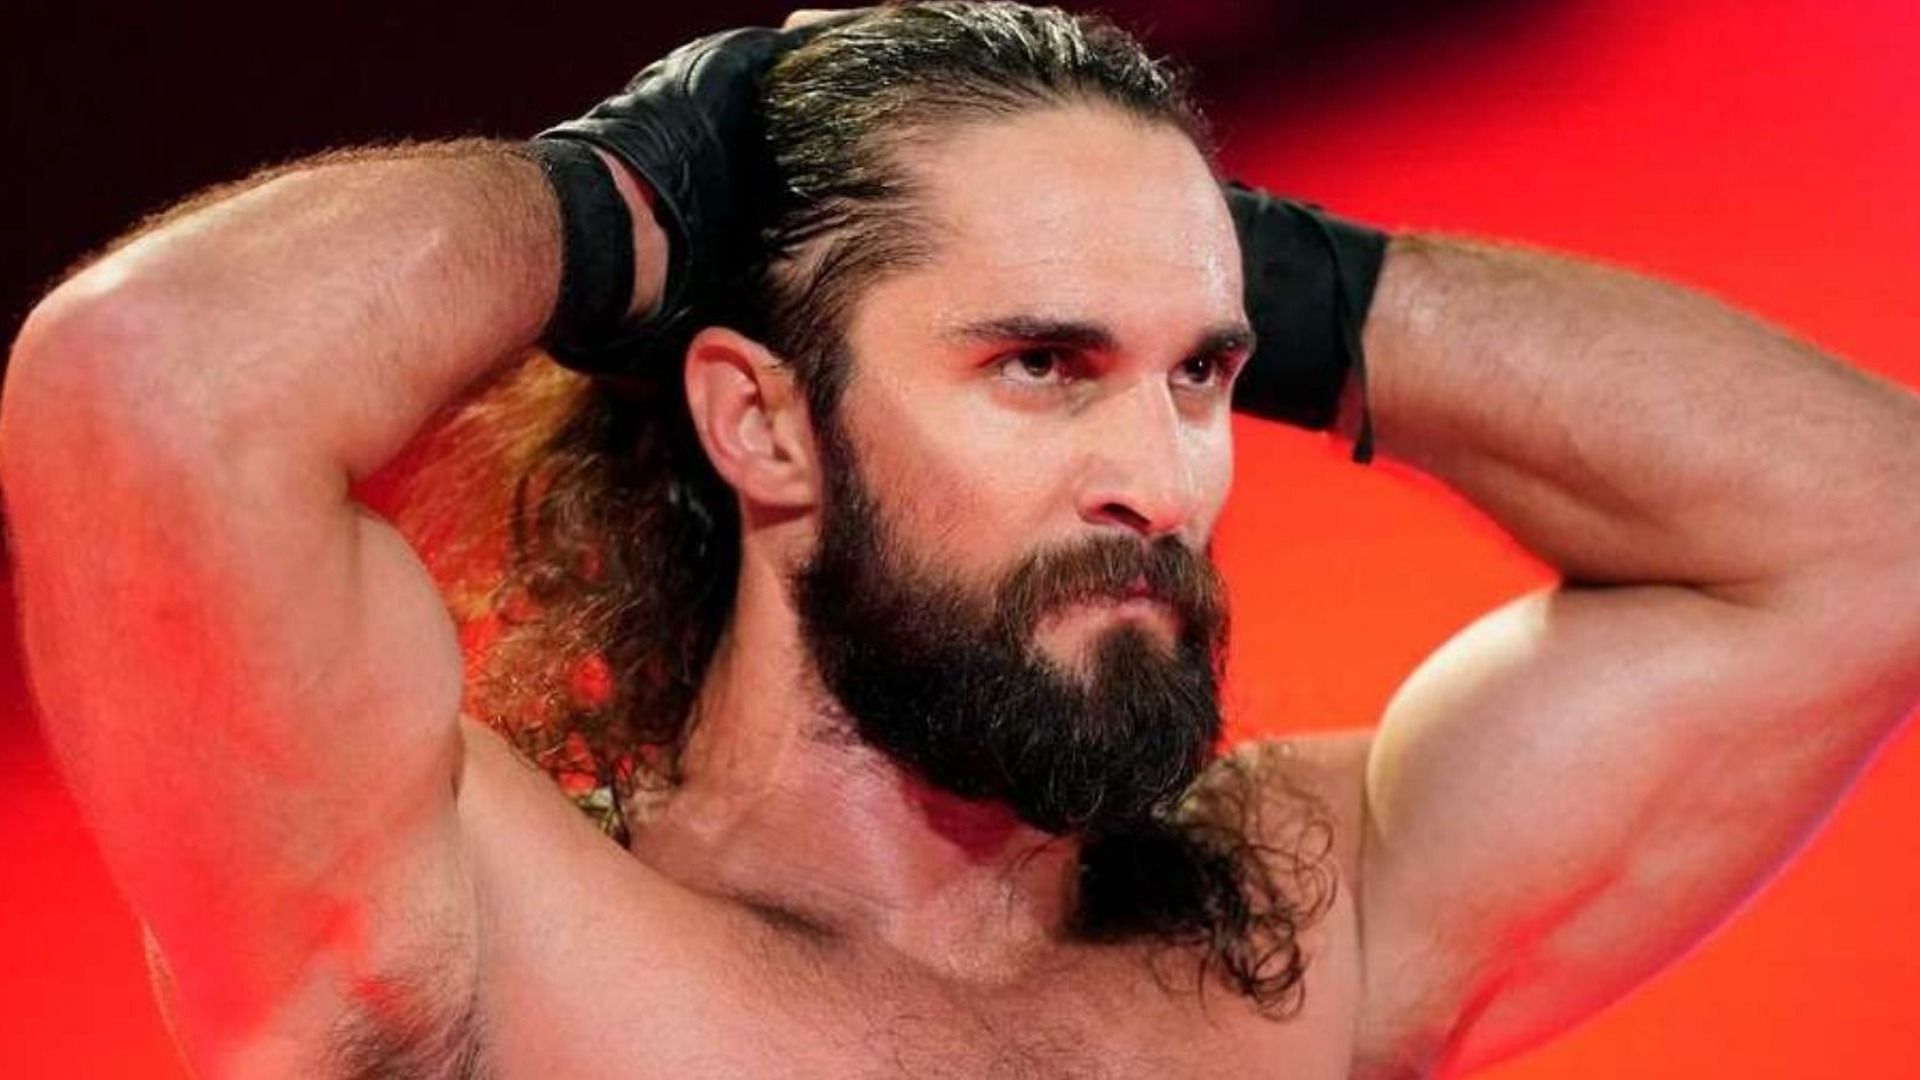 Rollins is currently in the middle of an interesting WrestleMania storyline.